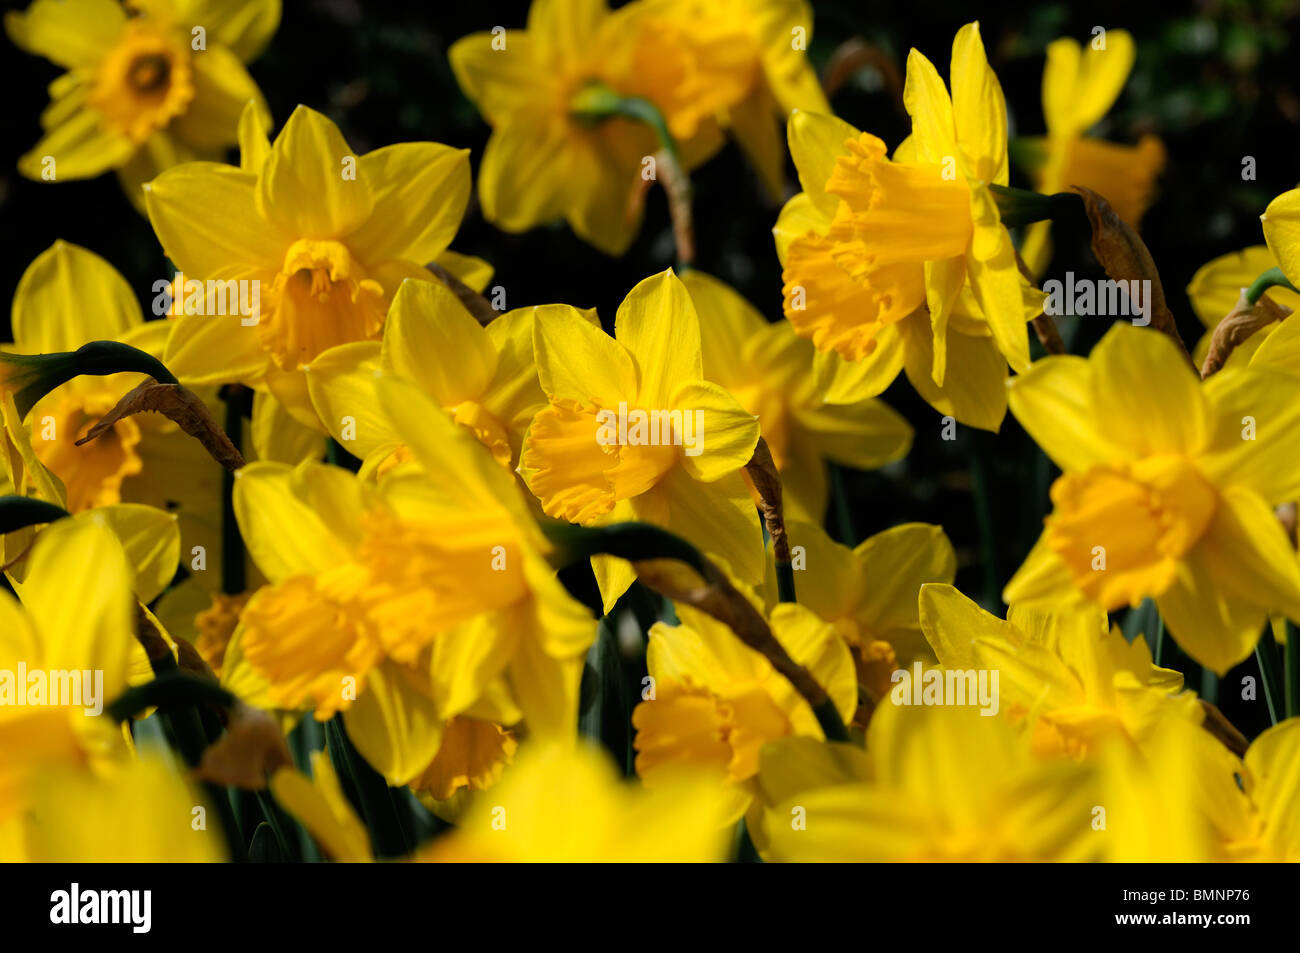 Narcissus carlton Daffodil division 2 early blooming macro photo Close up flower bloom blossom yellow cup Stock Photo